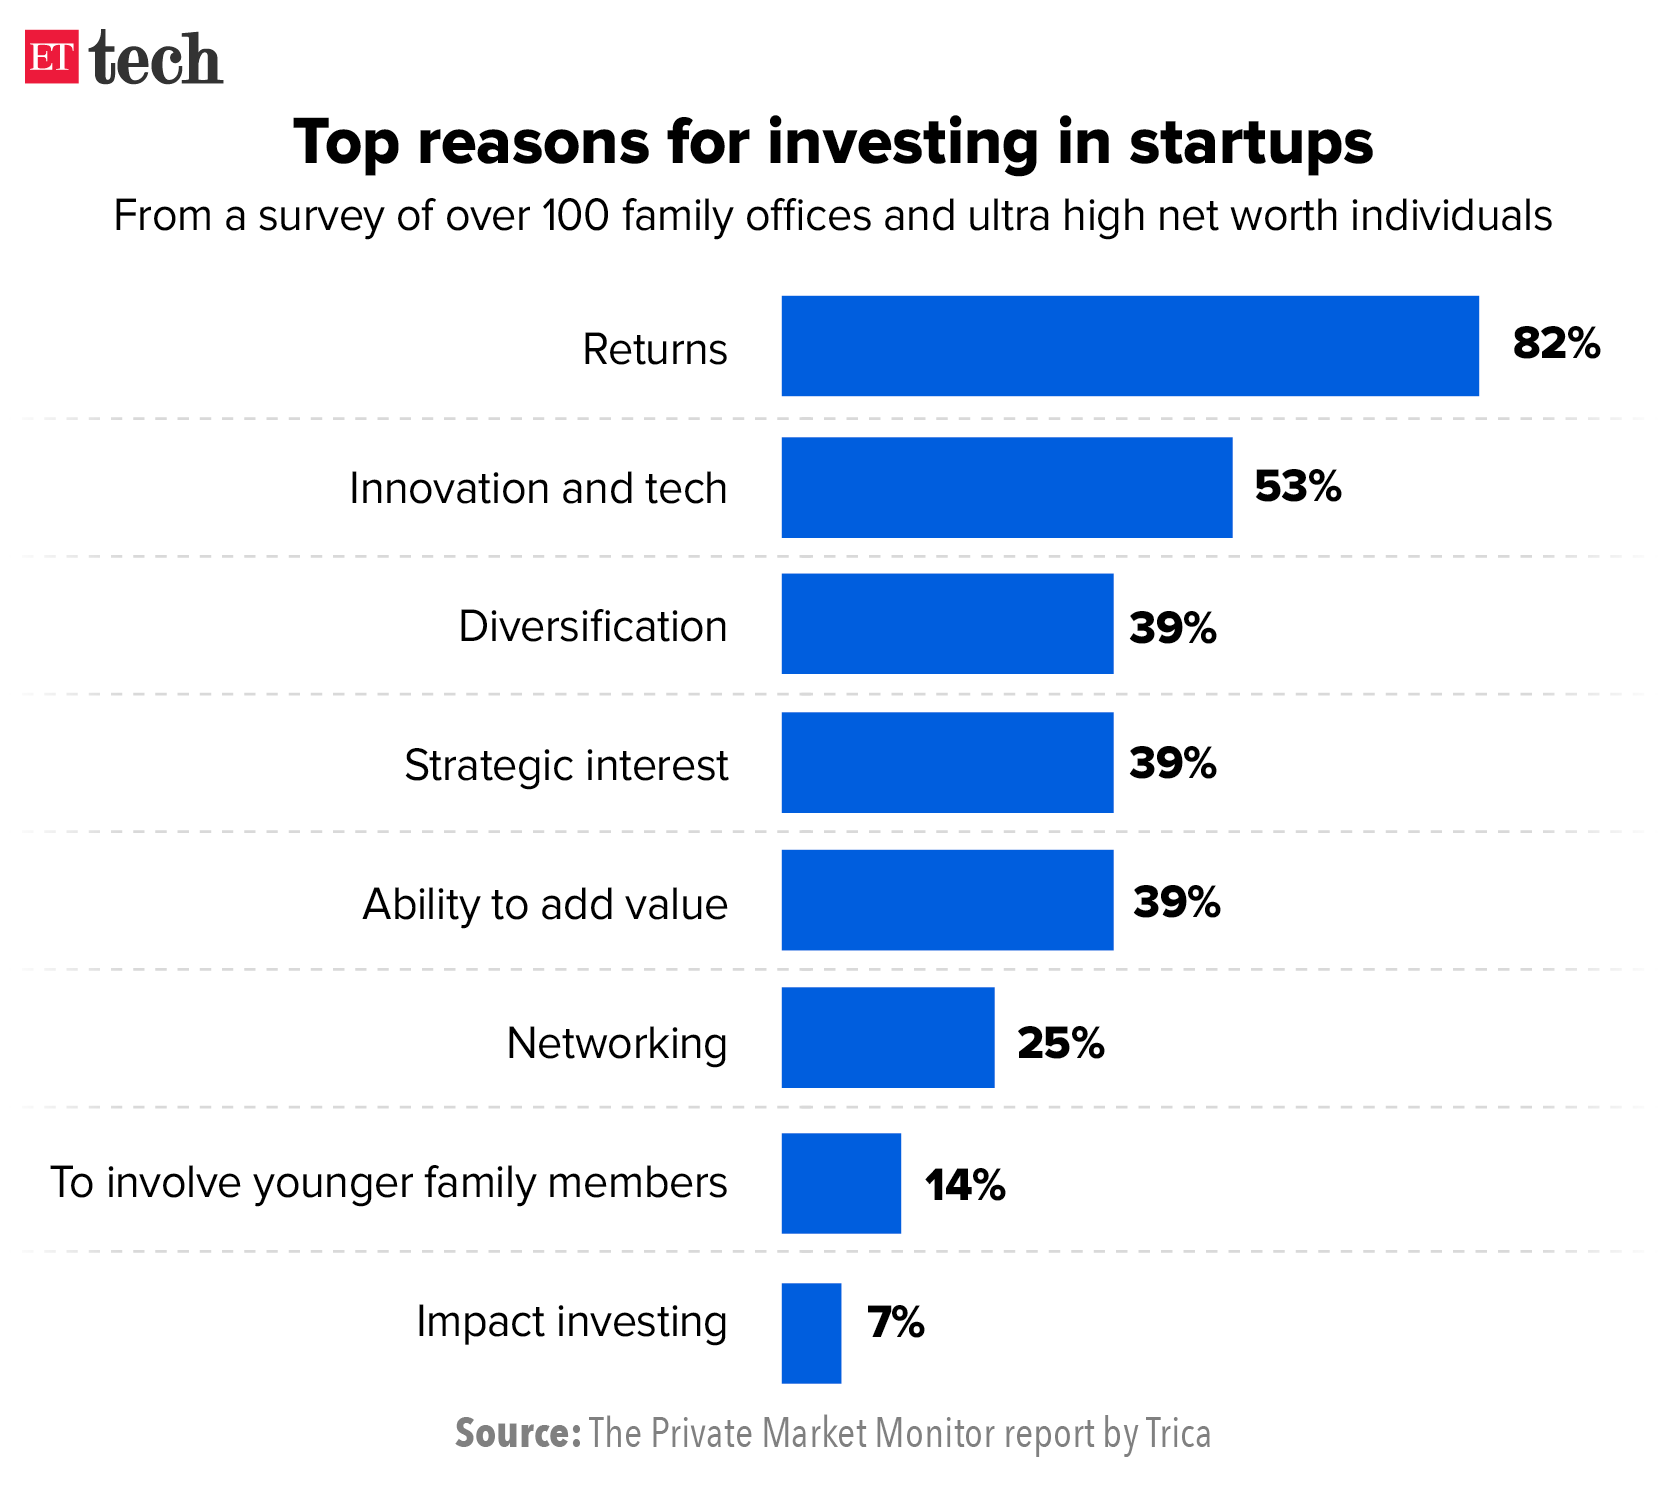 Top reasons for investing in startups